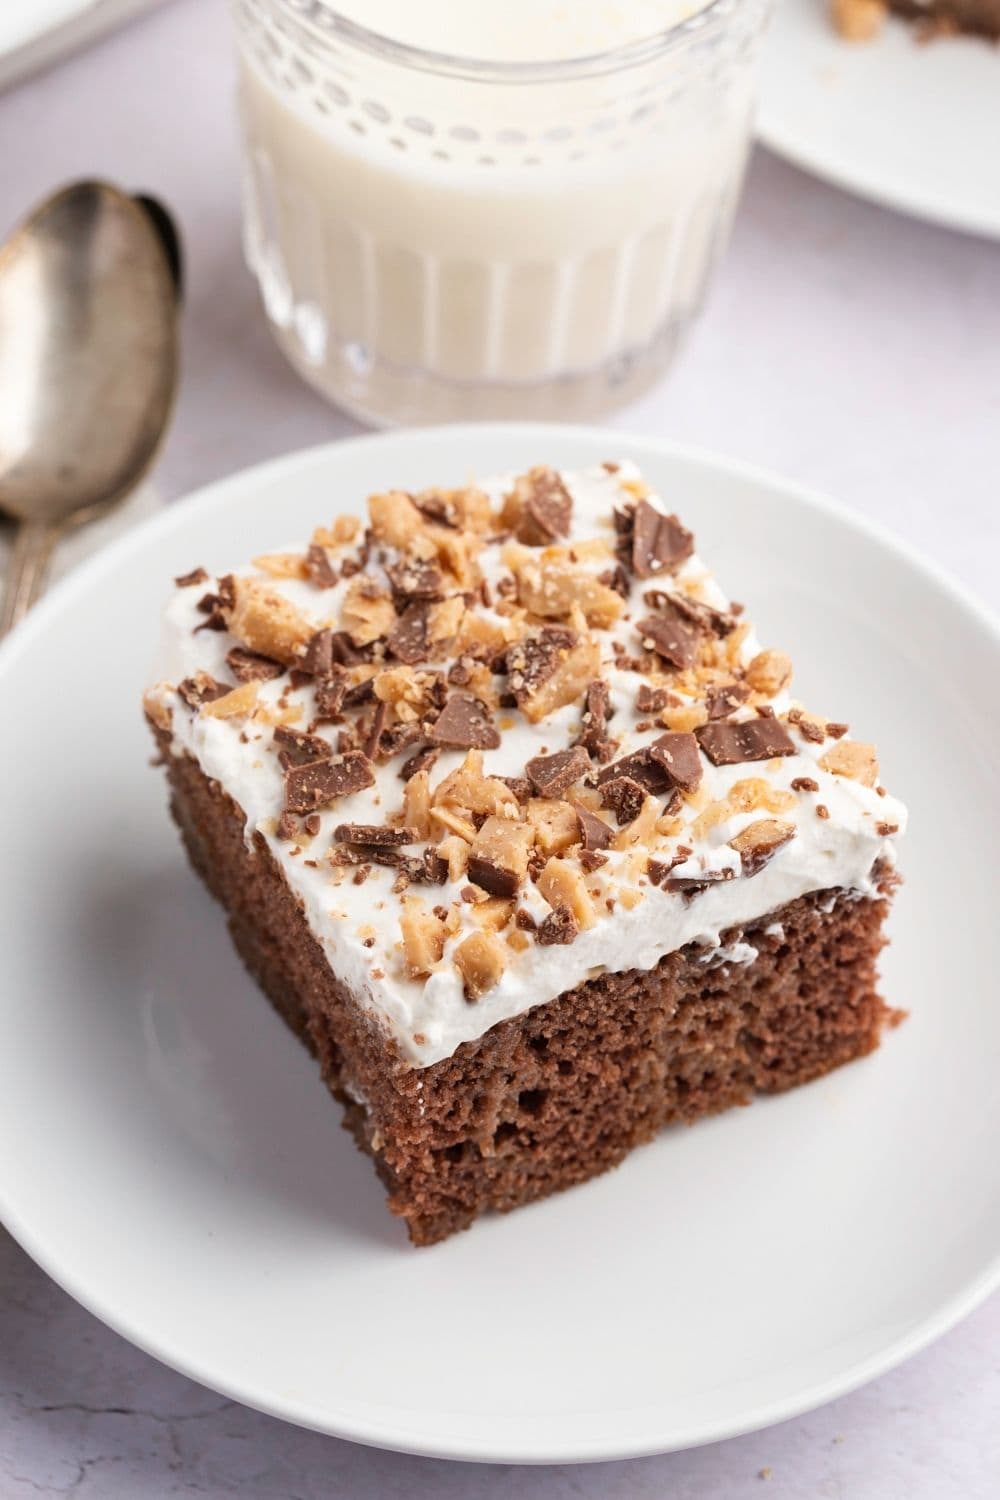 Slice of Heath Bar Cake served on a plate with a glass of milk